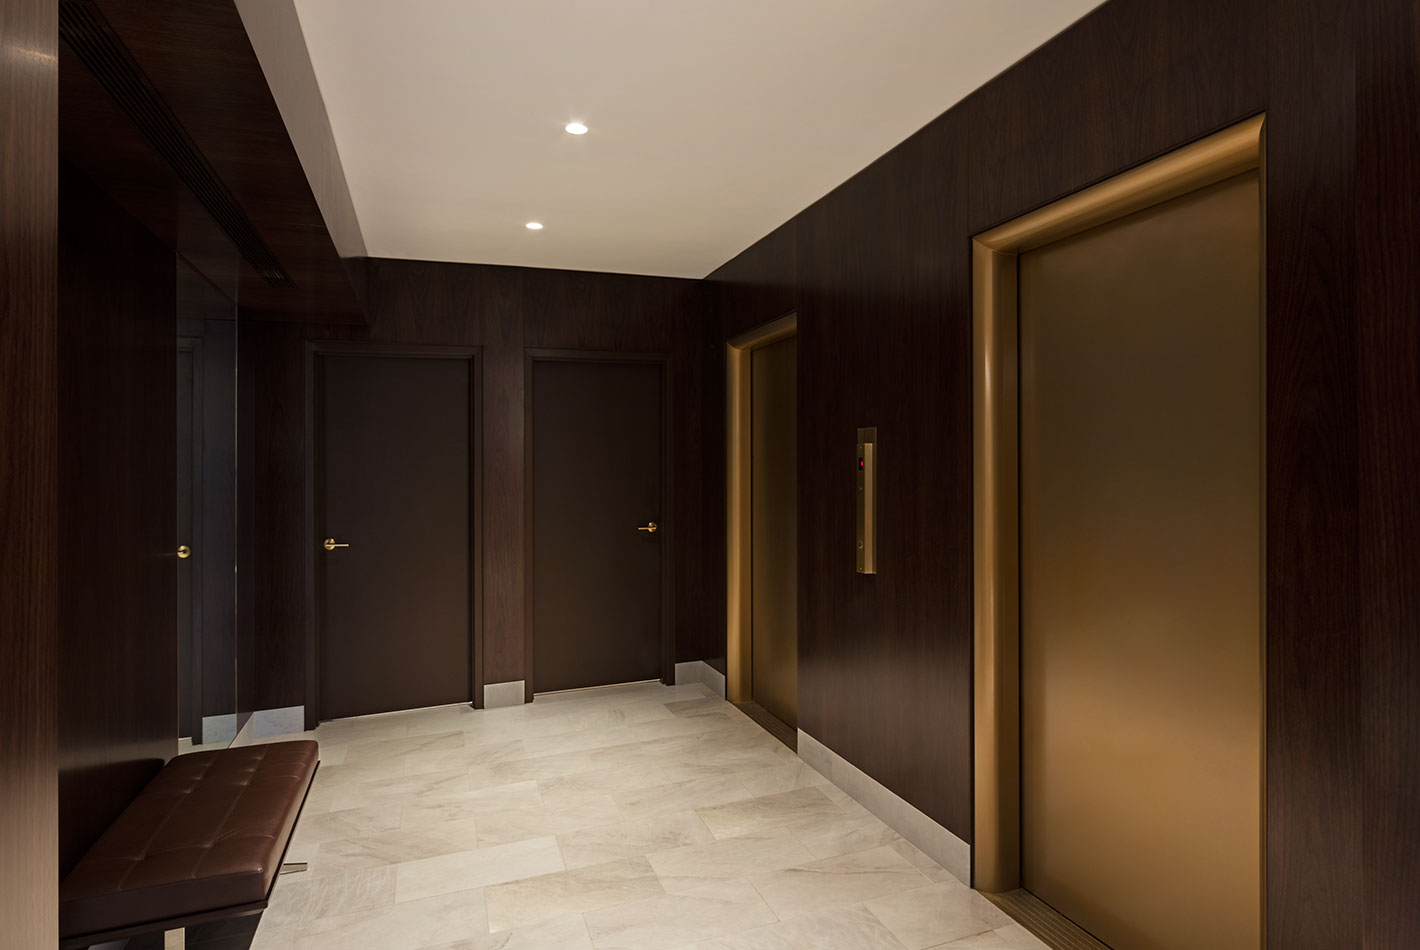 Walnut paneling lines the elevator bank at 1056 5th Avenue. Marble tile floors an satin brass elevator doors complete the space.